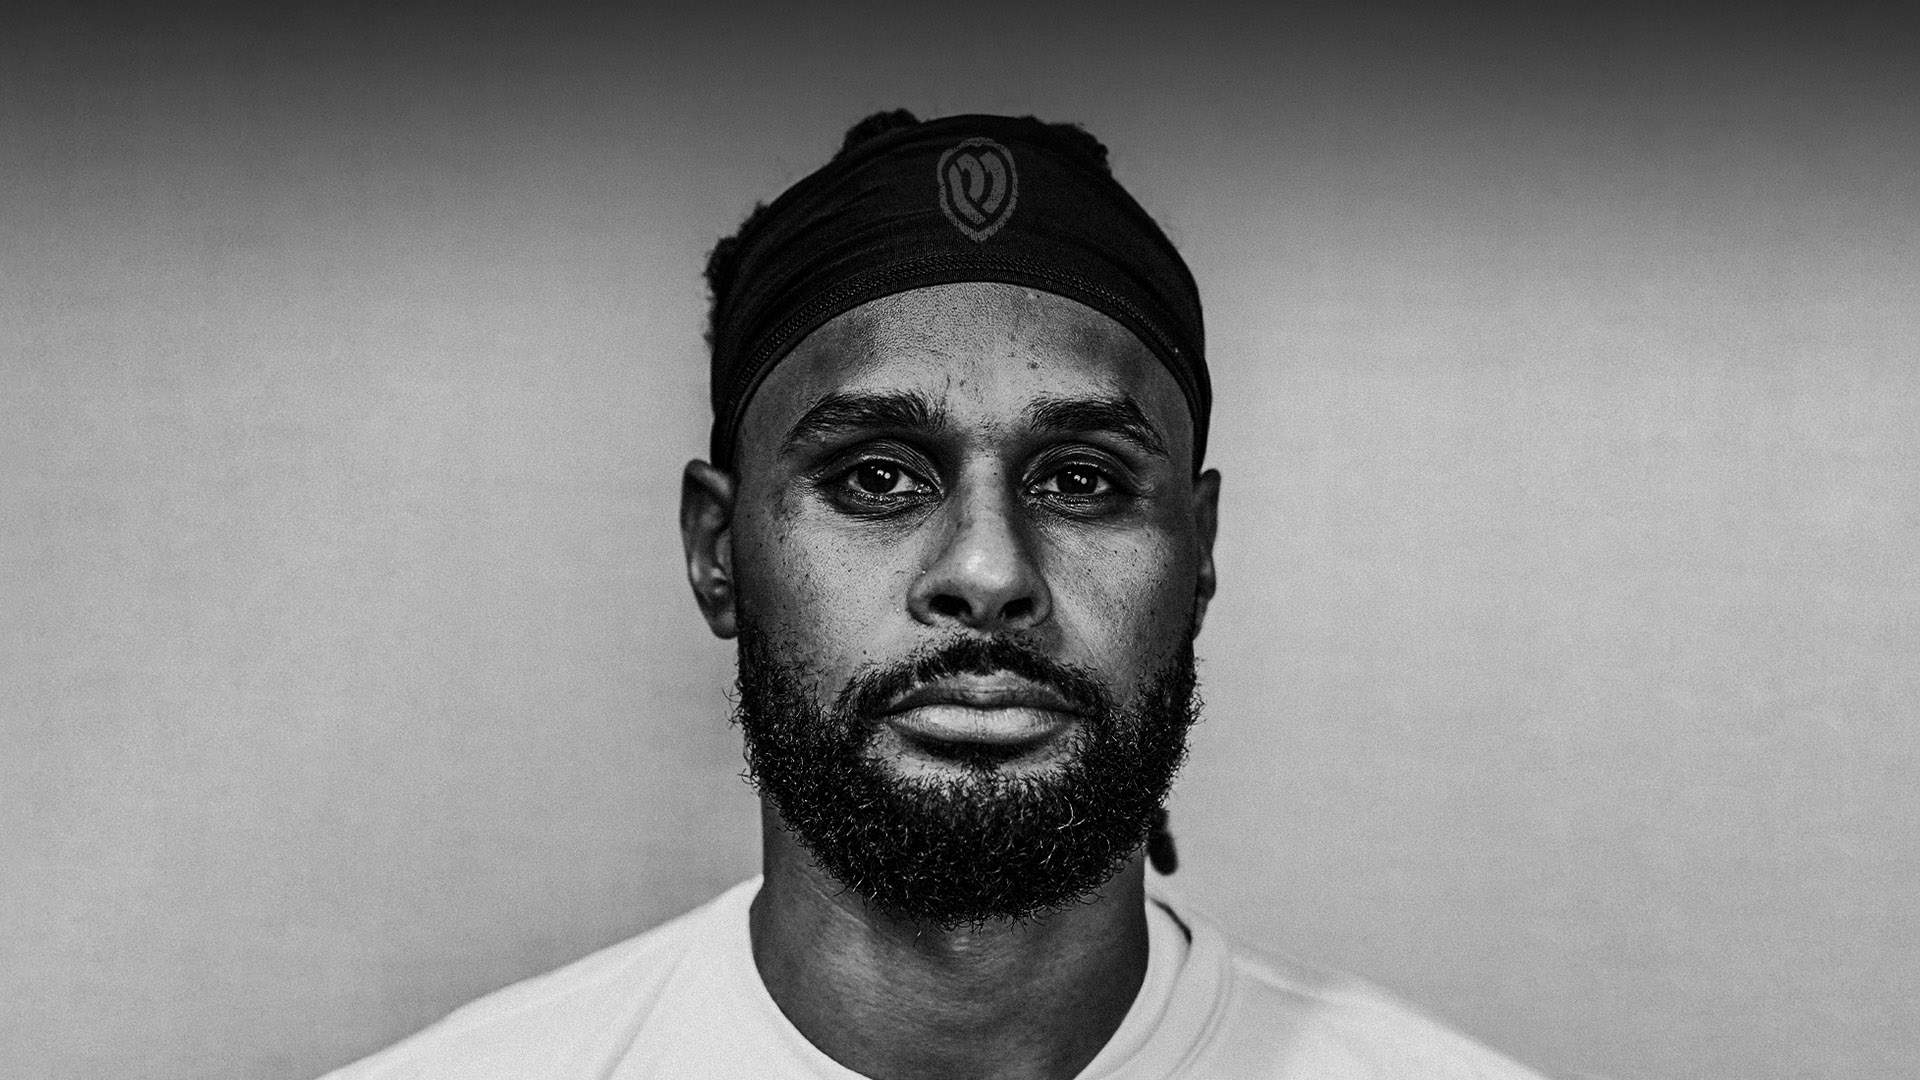 Australian Basketball Superstar Patty Mills Is Touring the Country to Chat About His NBA Career